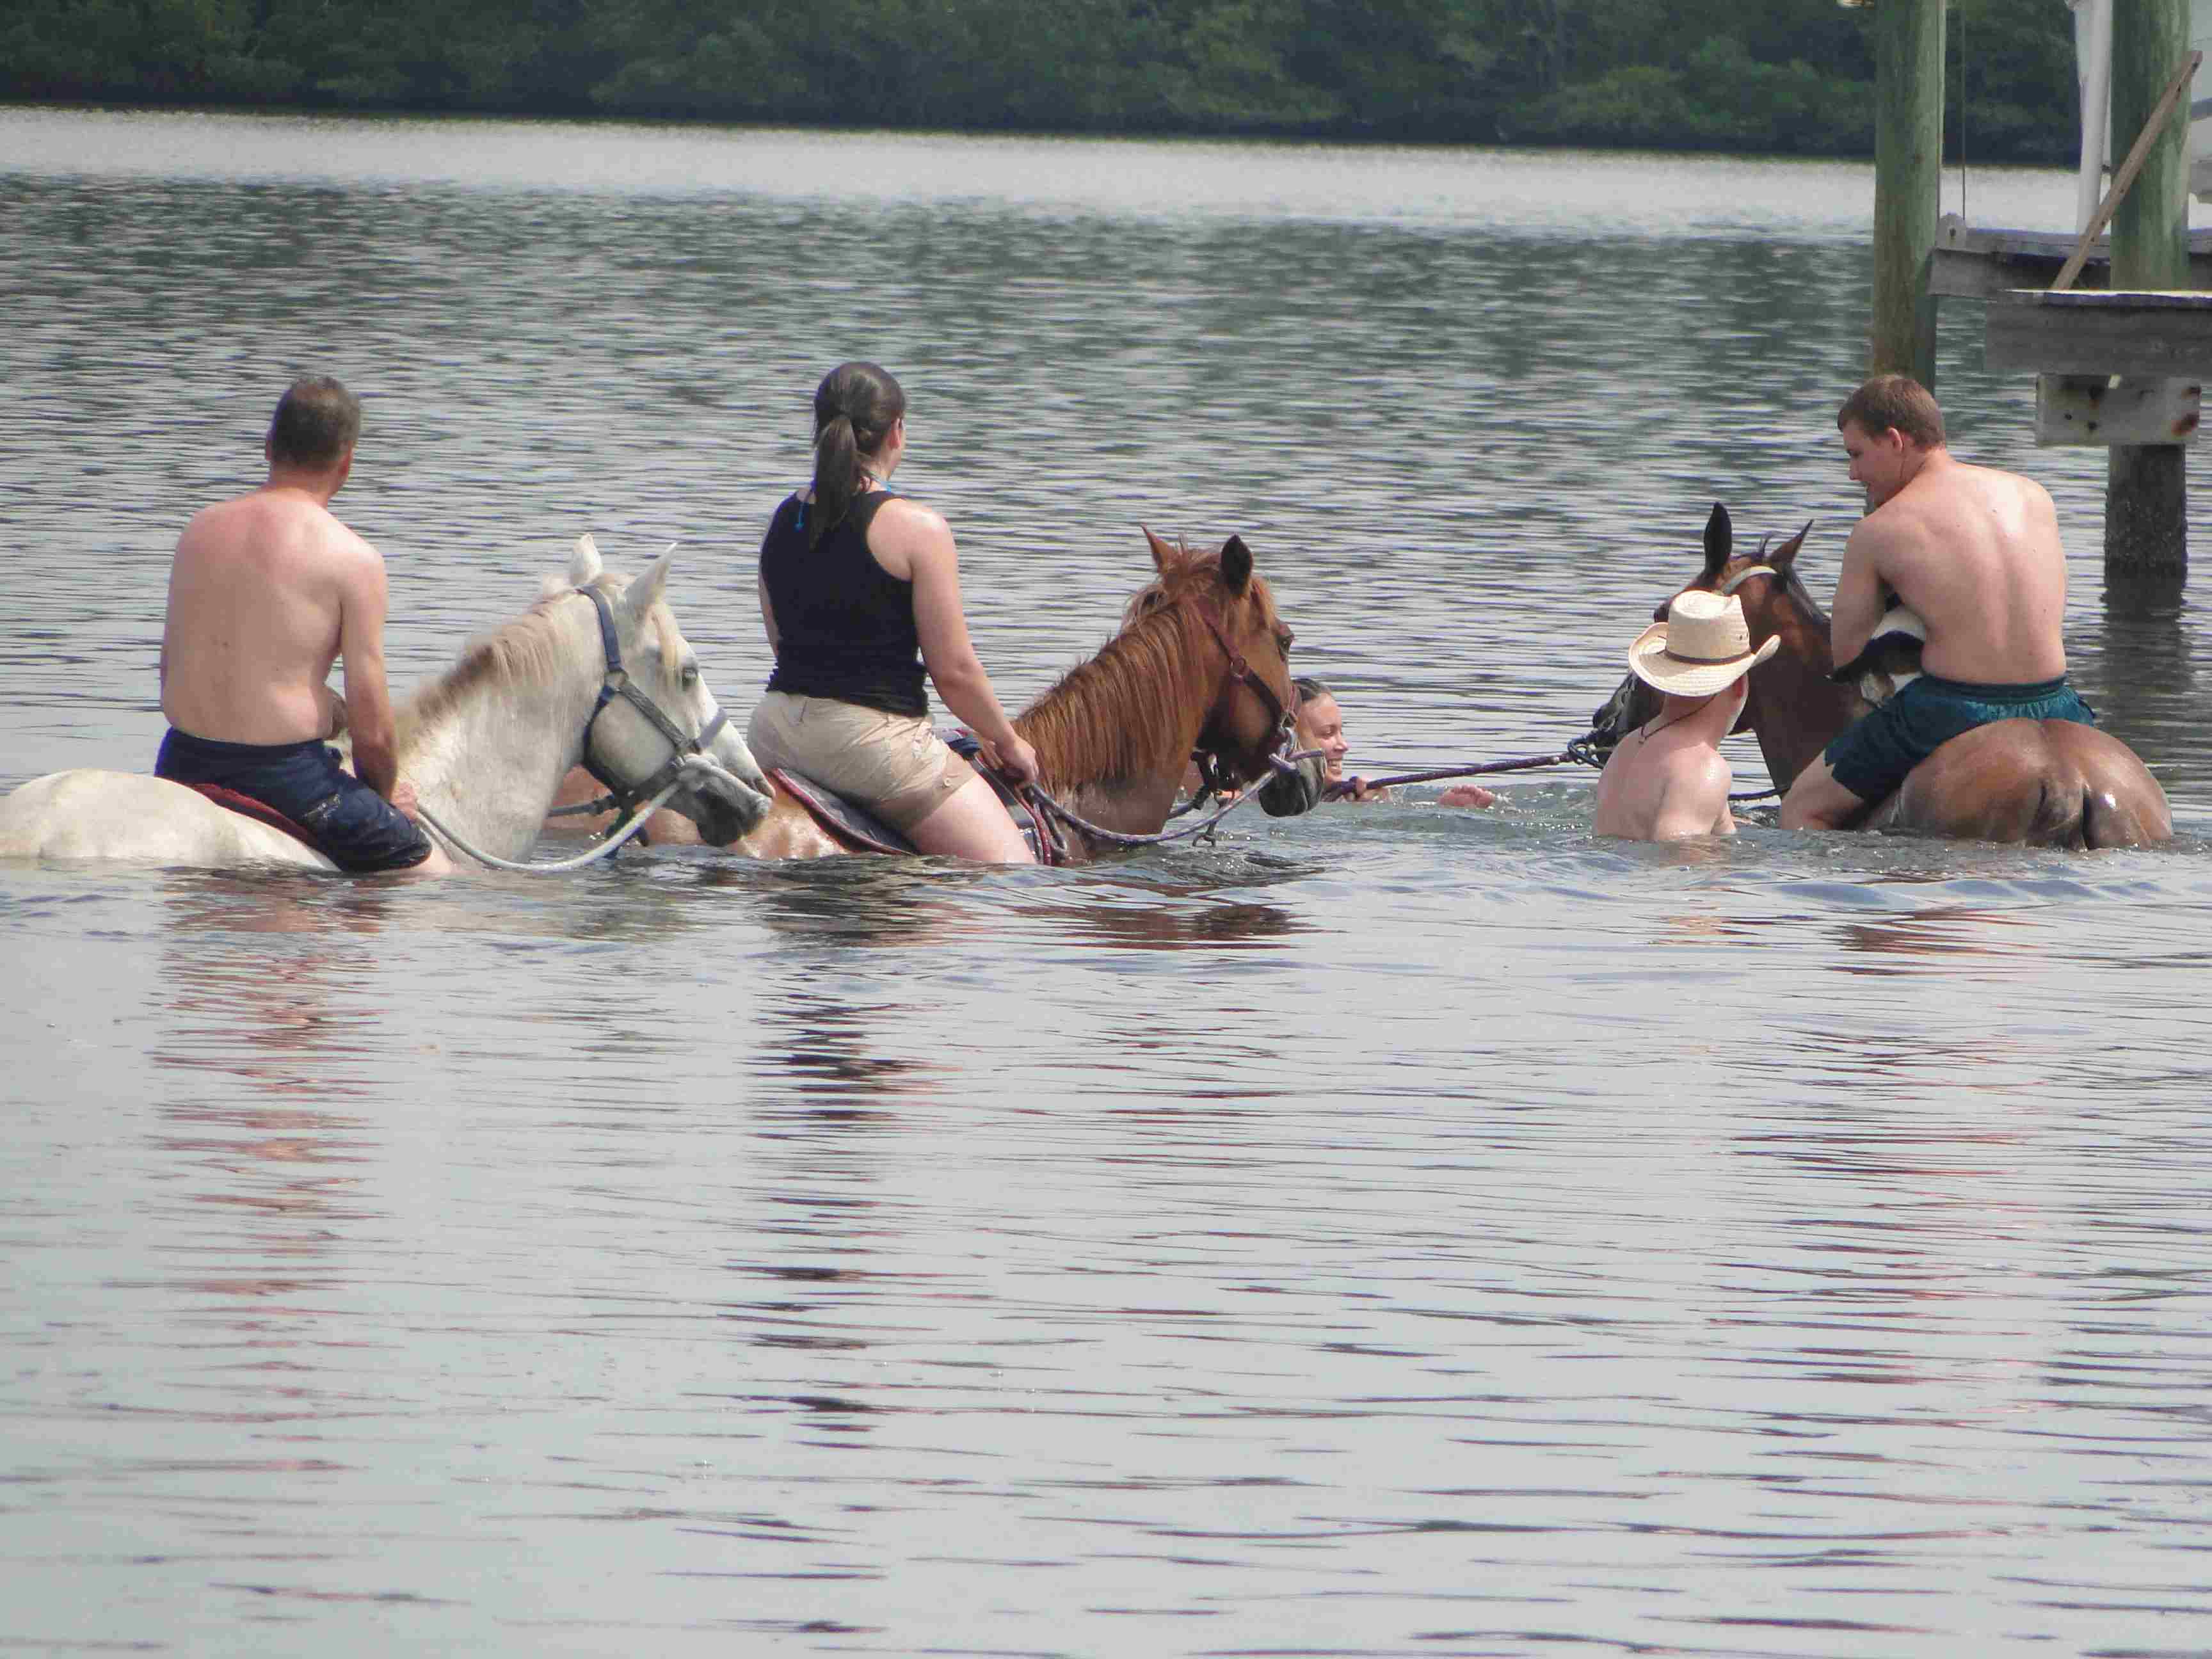 On the horse it goes into the water: brave ones try to surf. Photo: Bradenton Area